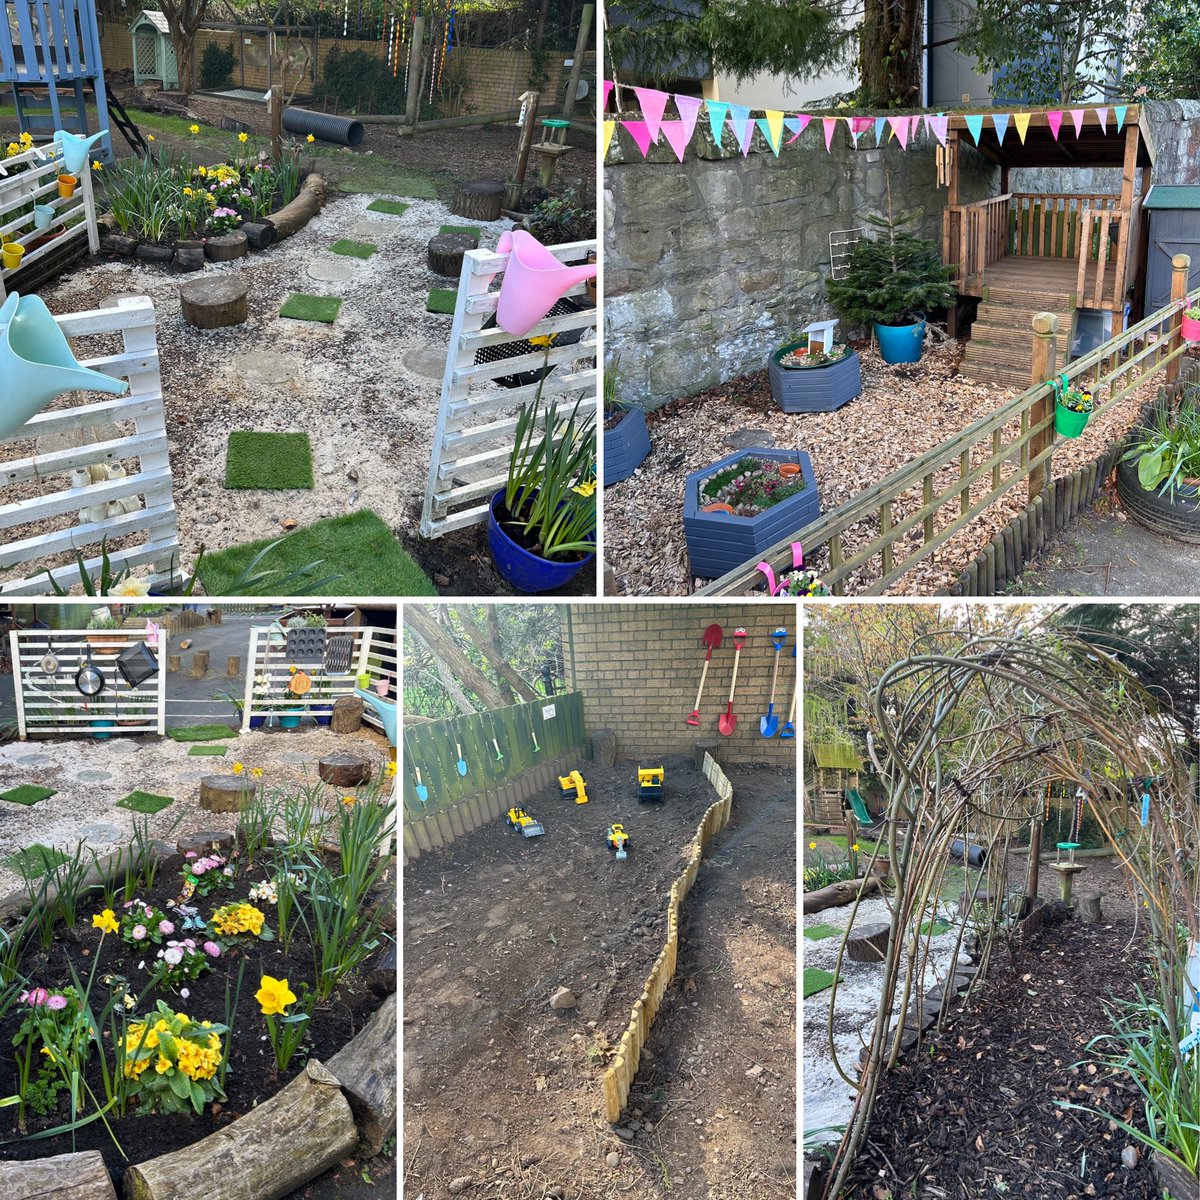 Over the holidays the Nursery team have been busy putting into place our new outdoor play areas. The children worked with the staff to plan these areas, deciding what they wanted to use the areas for and choosing resources #cargilfieldconnected